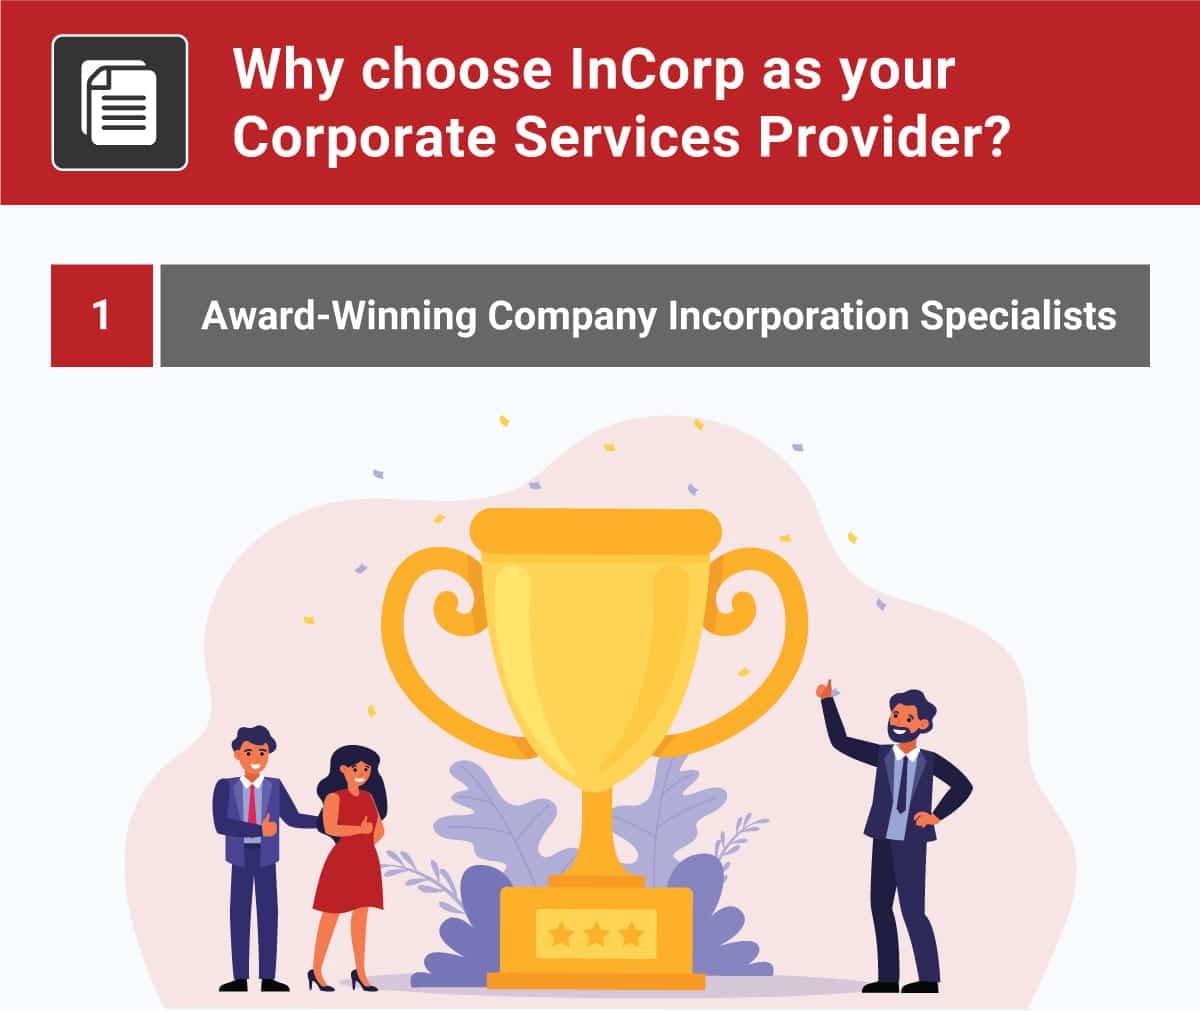 9 reasons InCorp is your go-to Corporate Services Provider